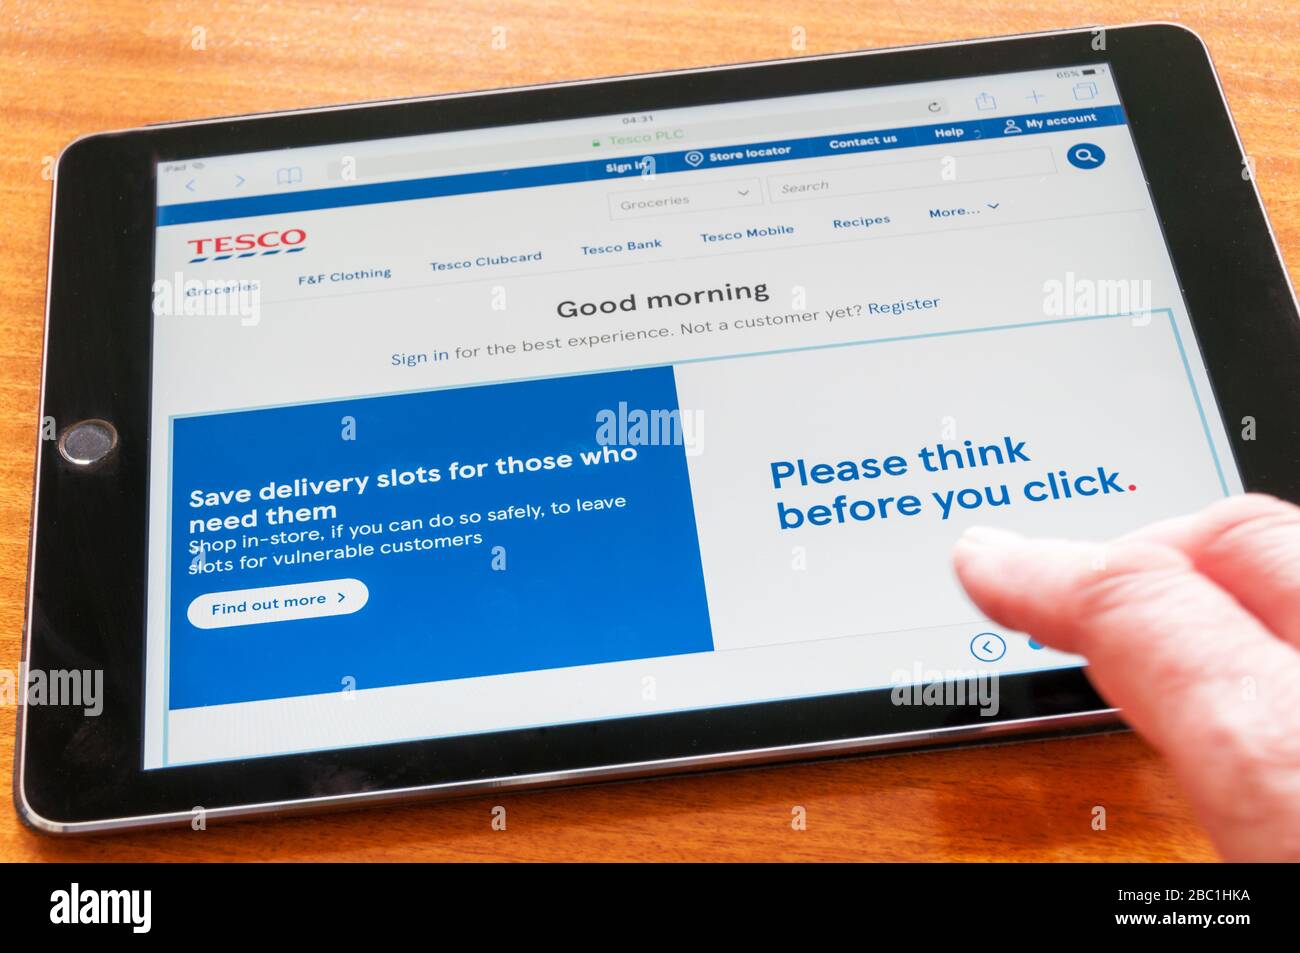 Tesco website during Covid-19 Coronavirus pandemic asks people to Think Before You Click to save delivery slots for key workers & others who need them Stock Photo